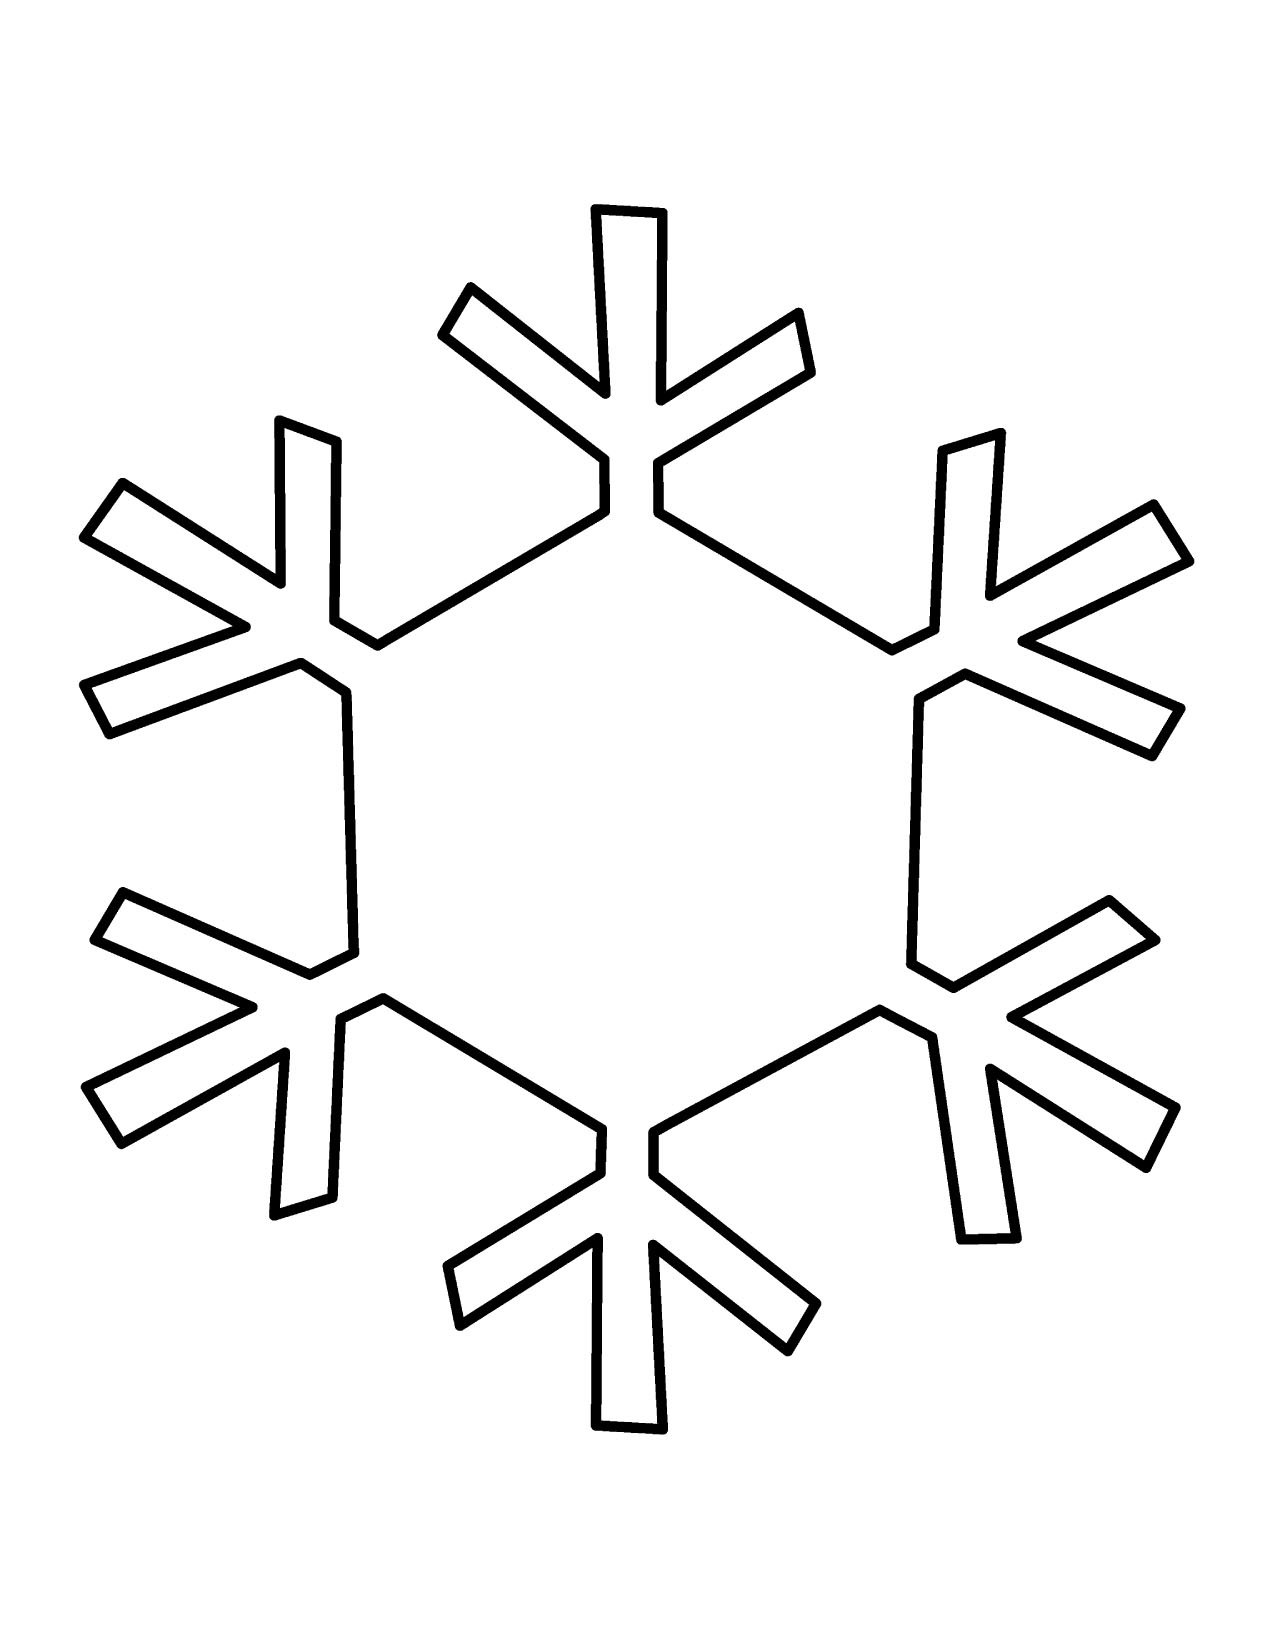 Simple snowflake clipart free clipart images.